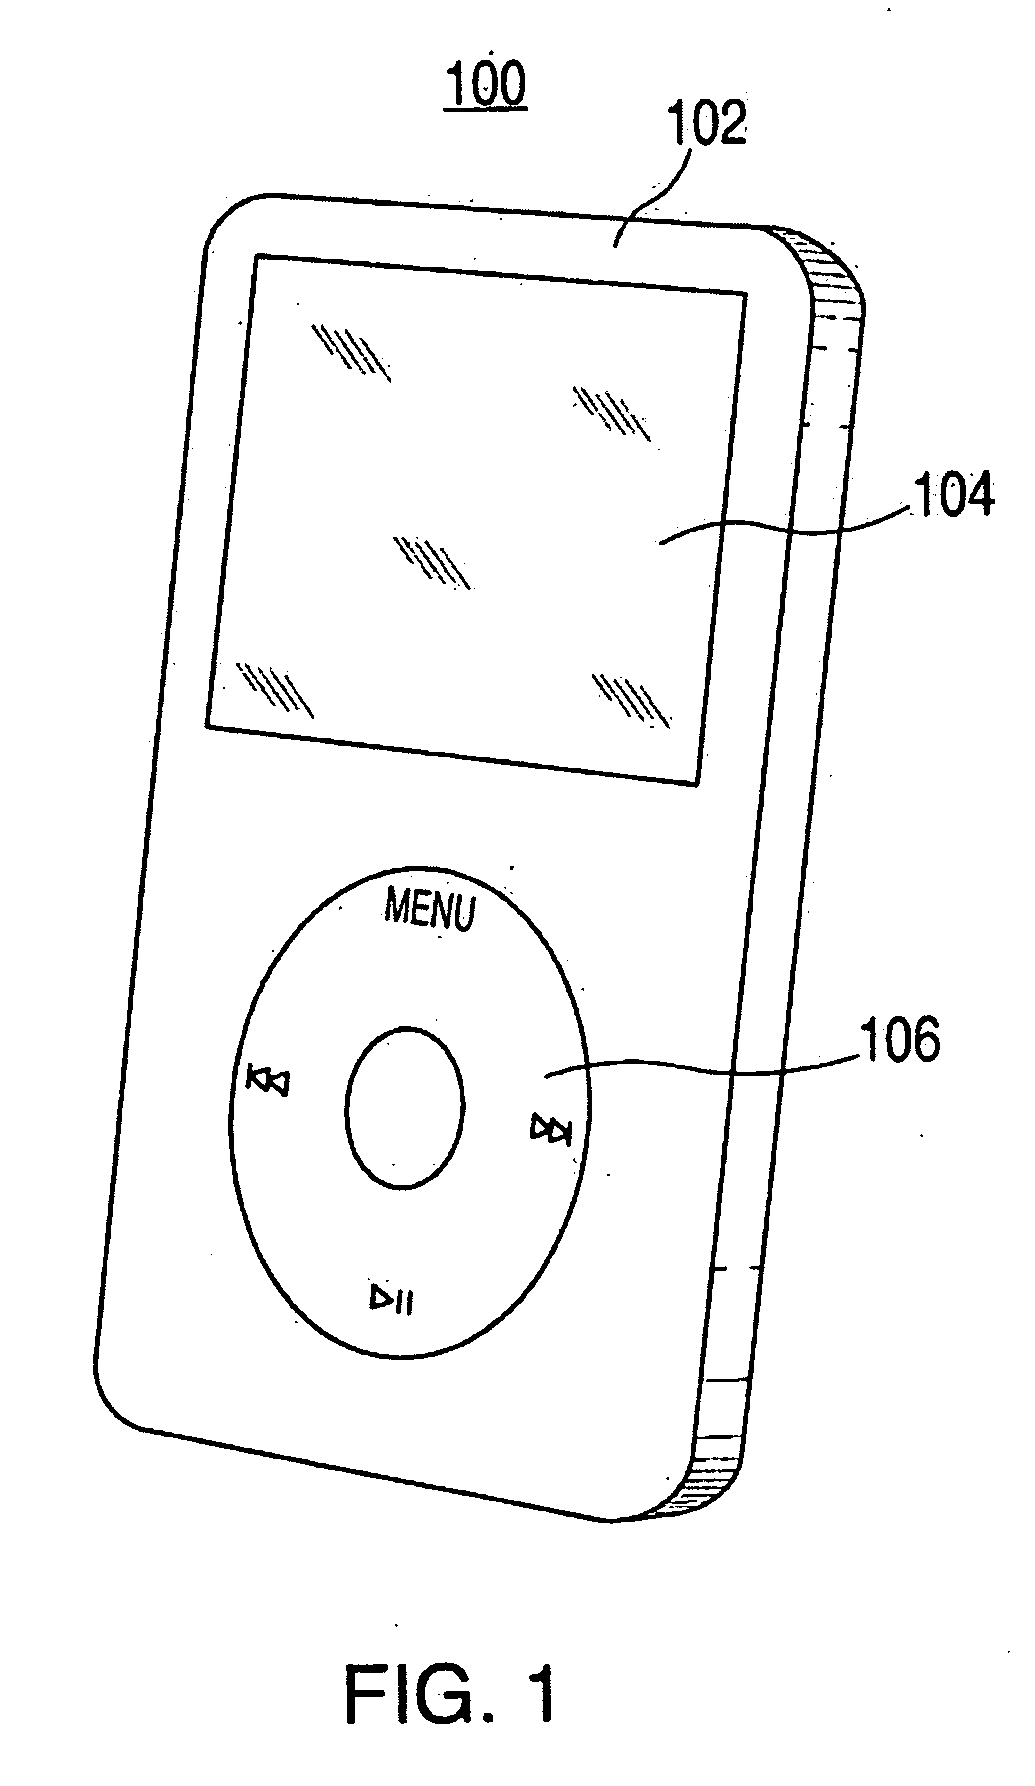 Systems and methods for saving and restoring scenes in a multimedia system